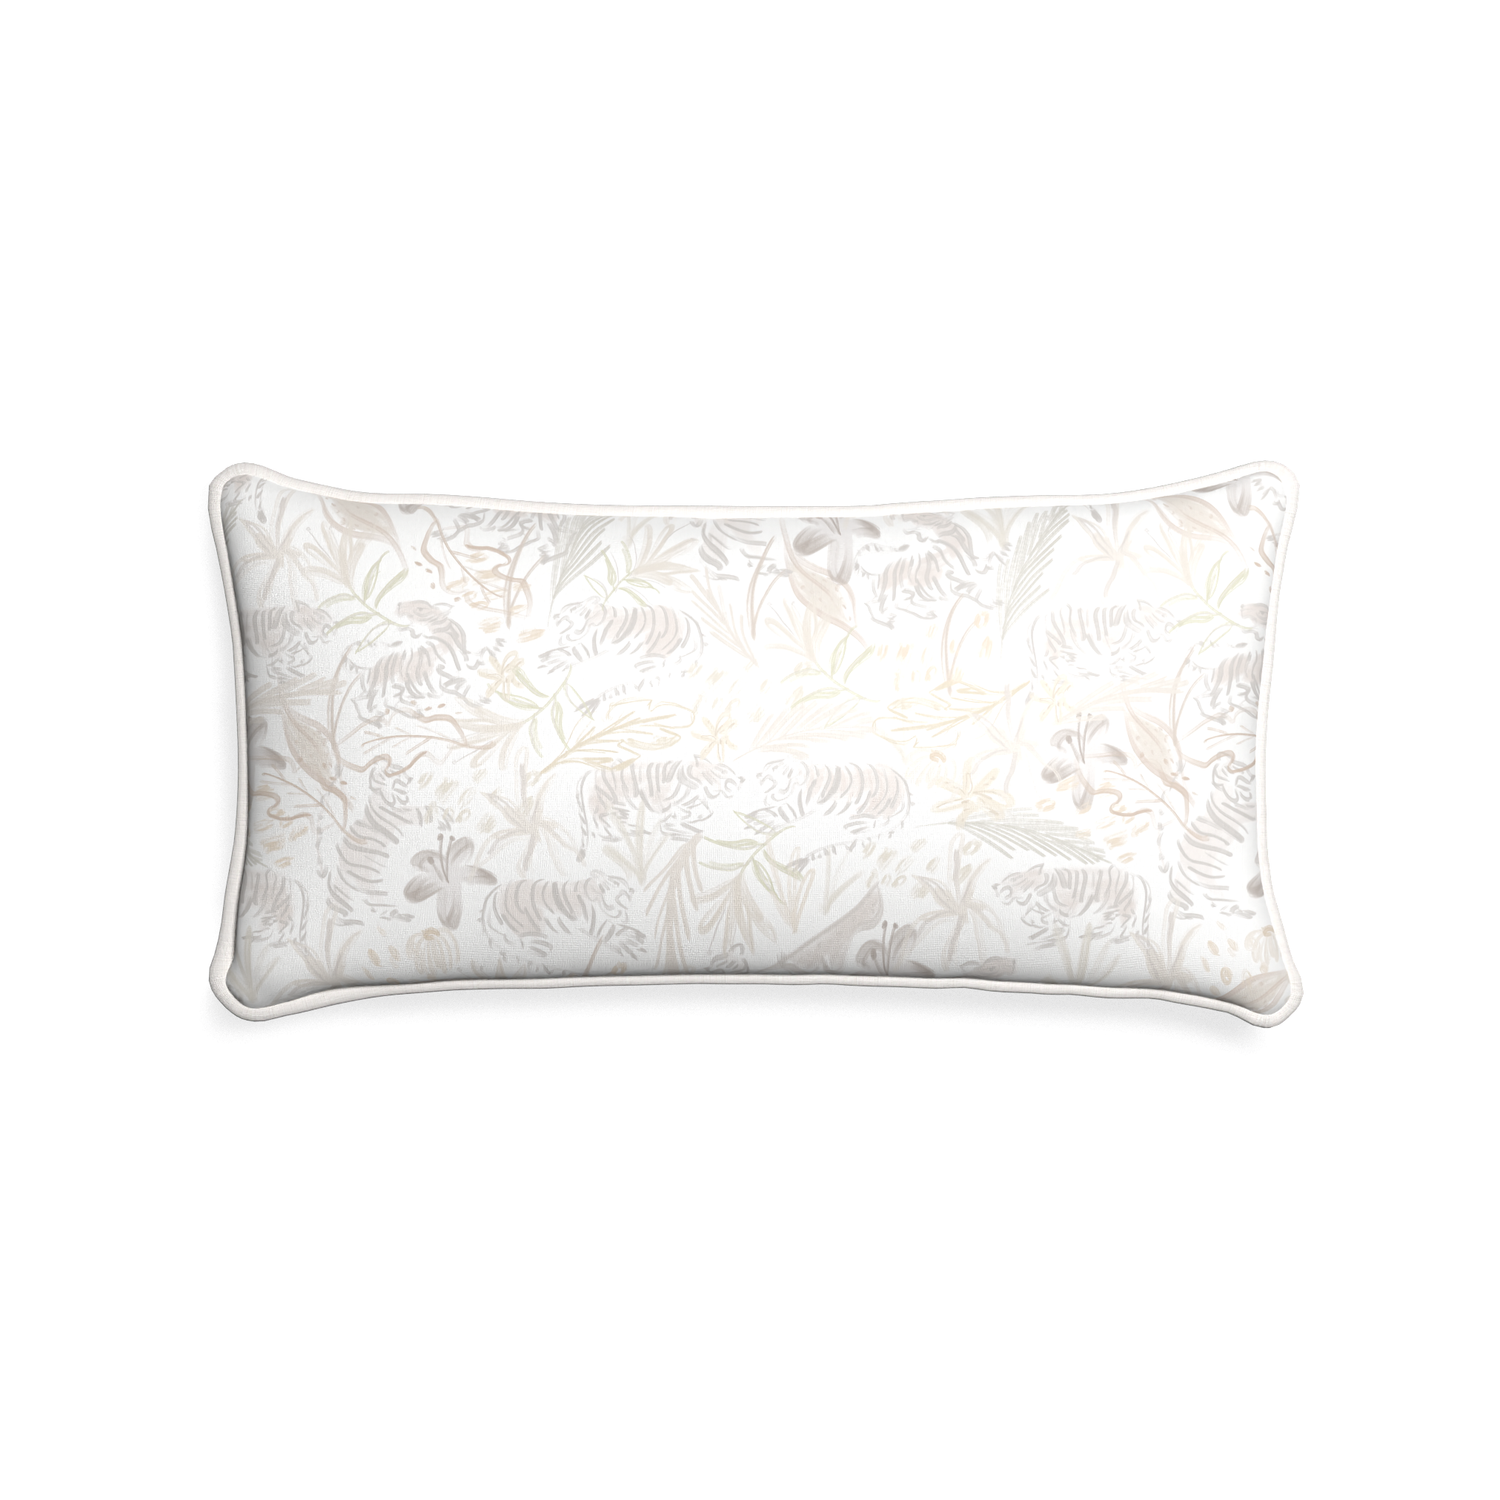 Midi-lumbar frida sand custom beige chinoiserie tigerpillow with snow piping on white background